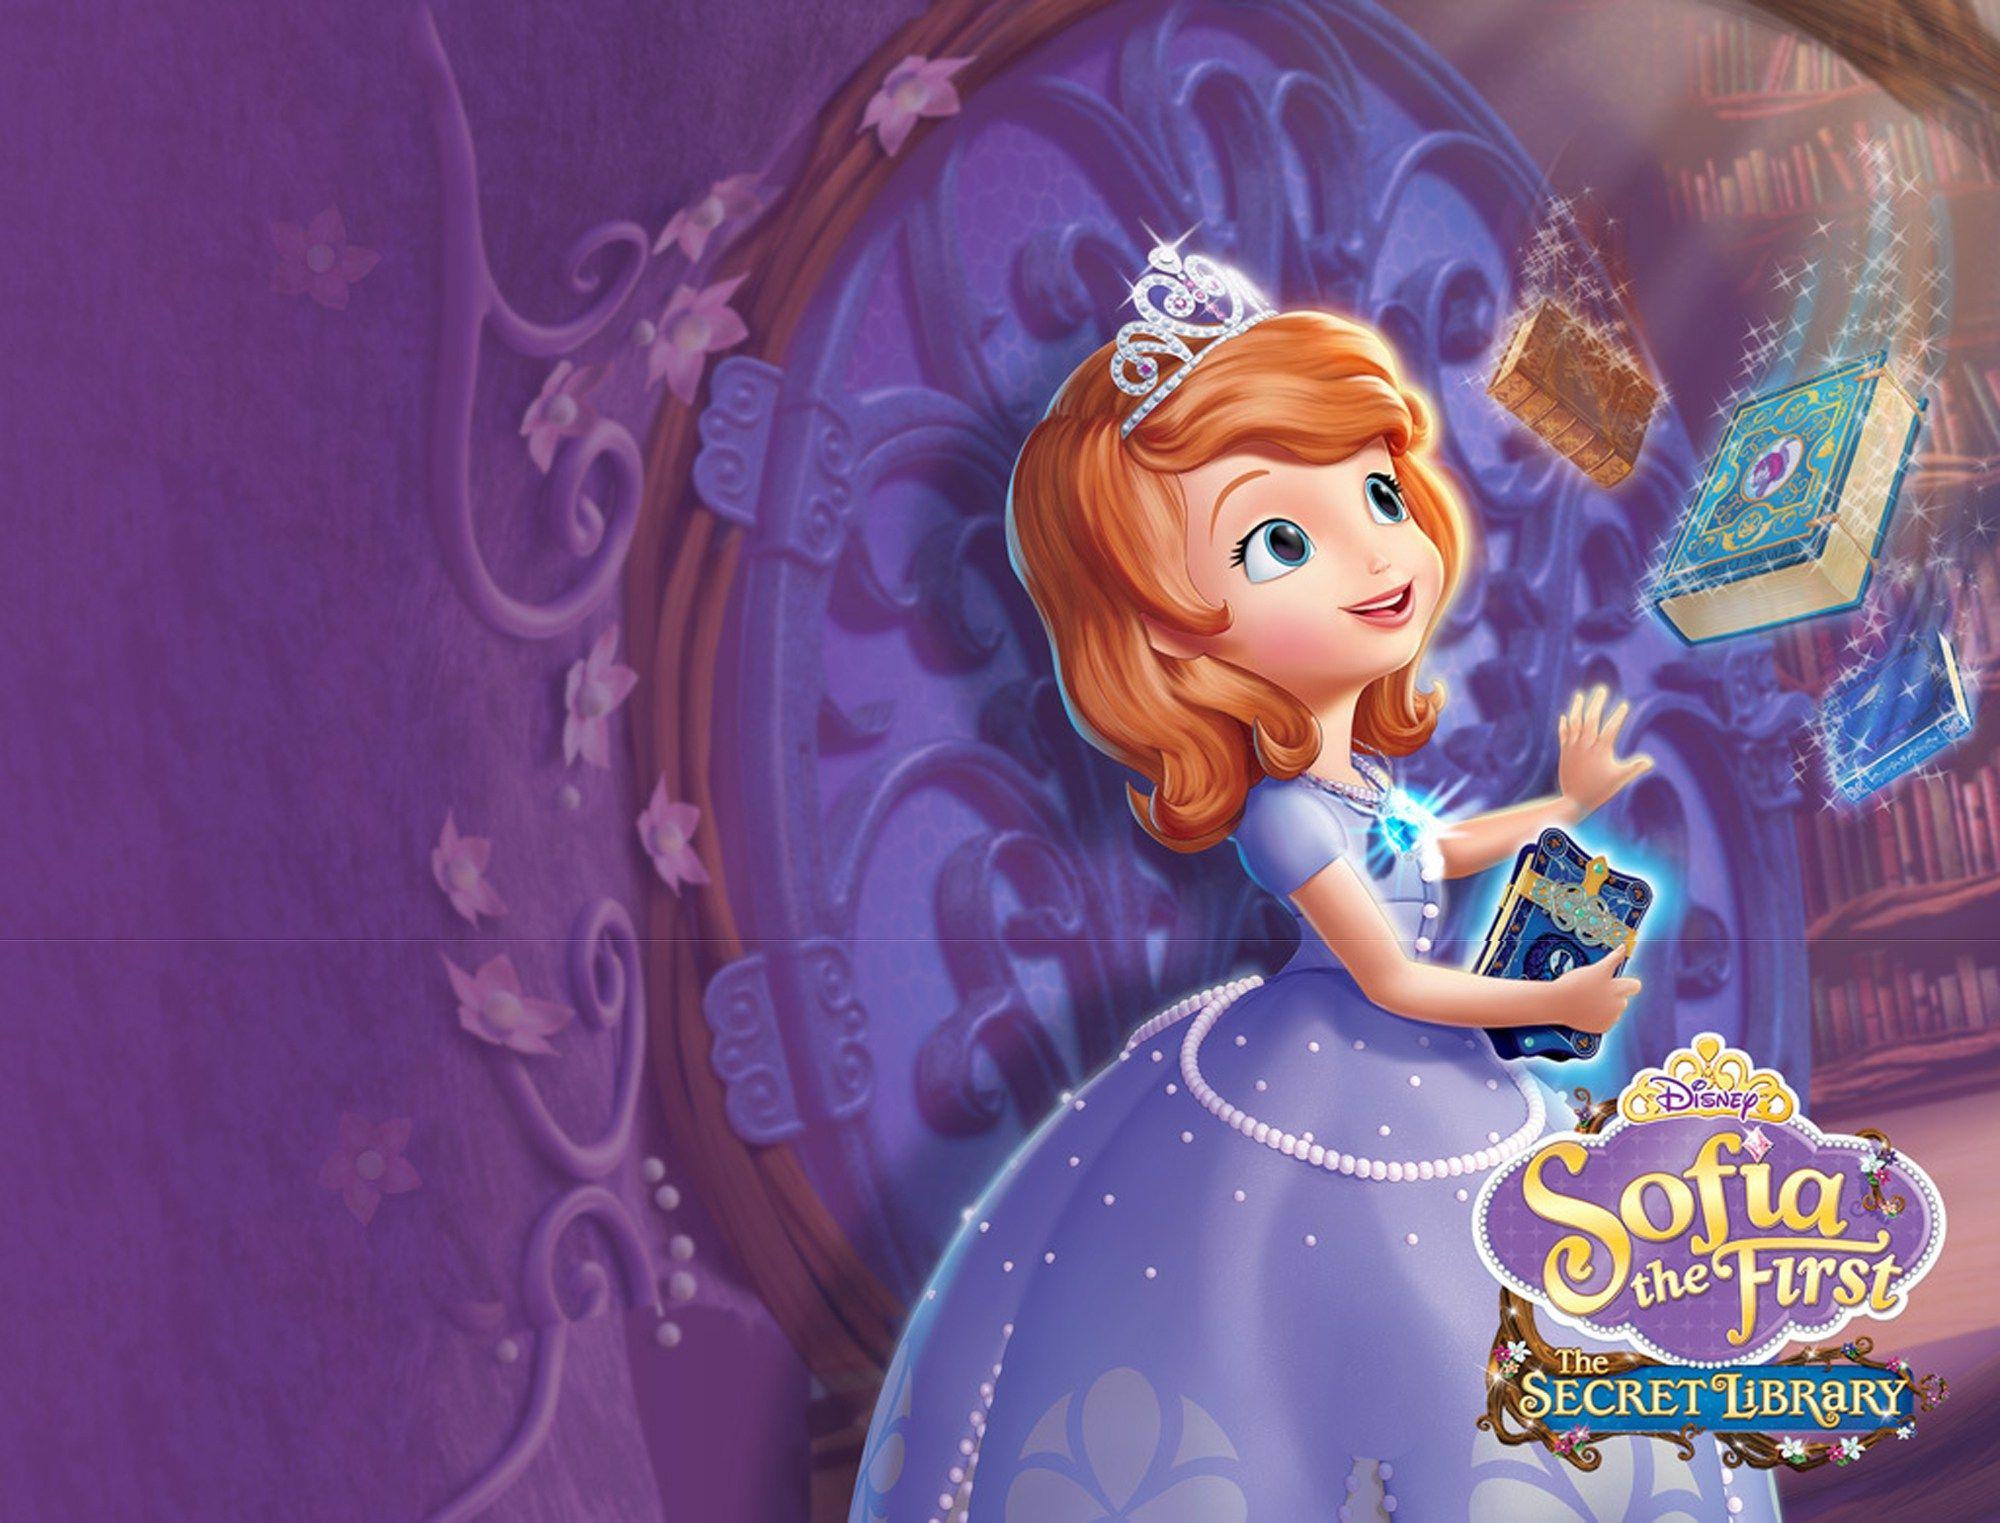 Sofia The First The Secret Library. Disney